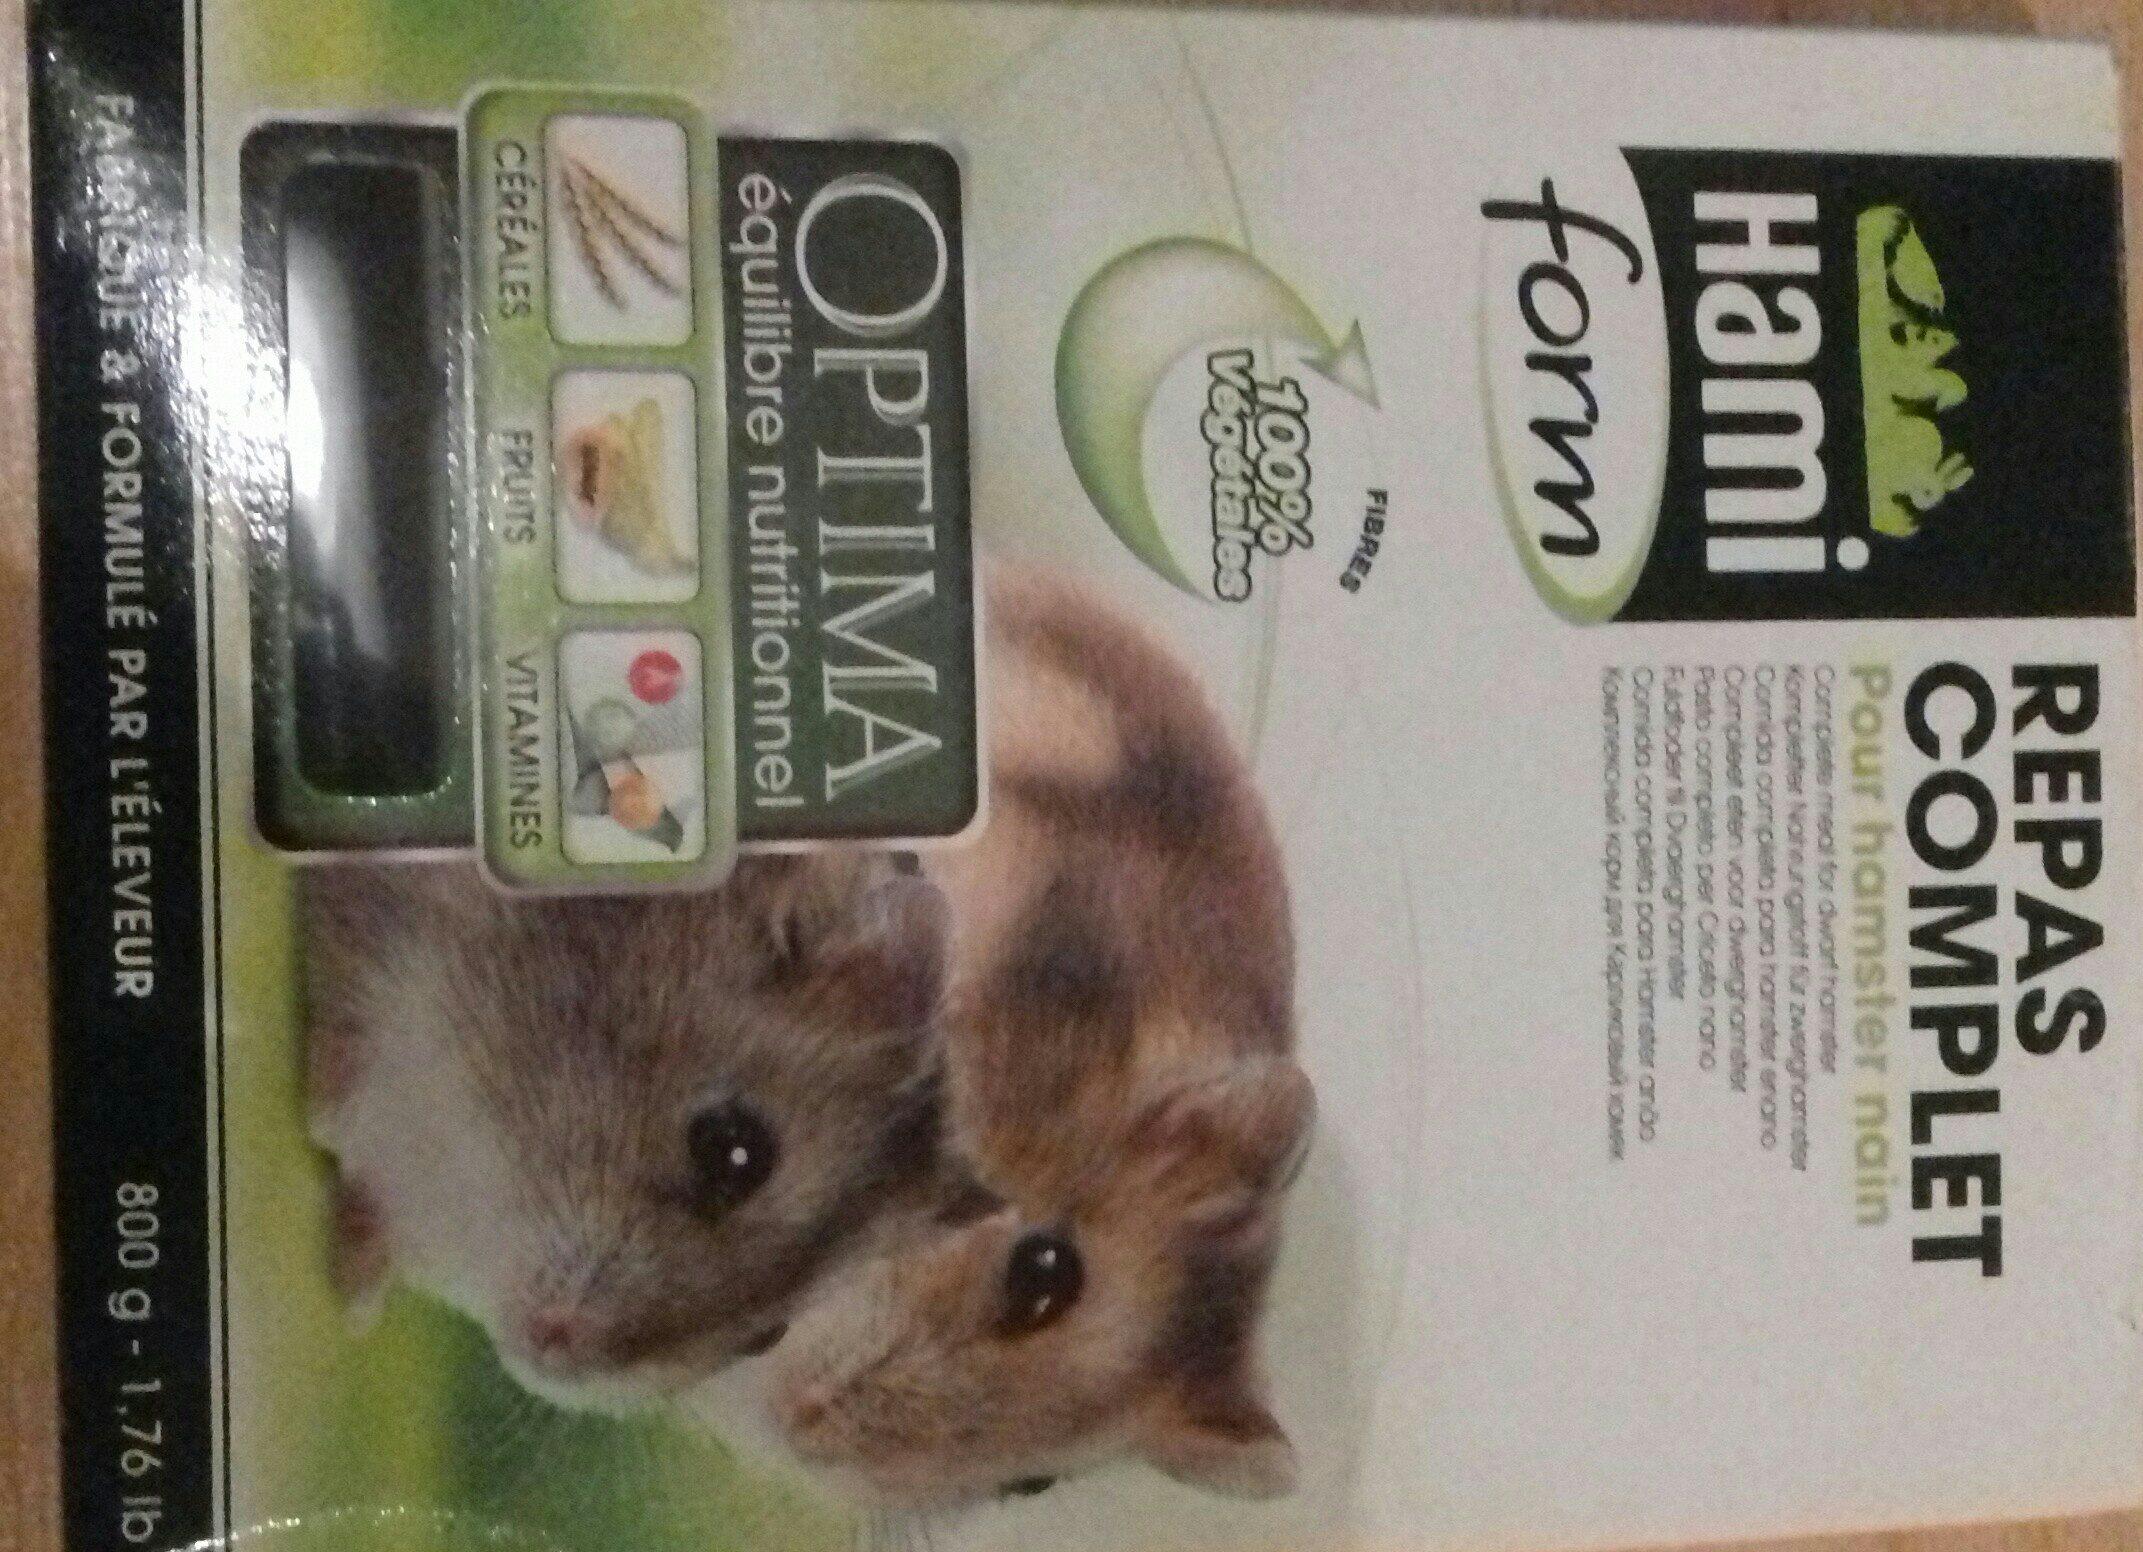 Hamiform - Repas Complet Optima Pour Hamster Nain - 800G - Ingredients - fr